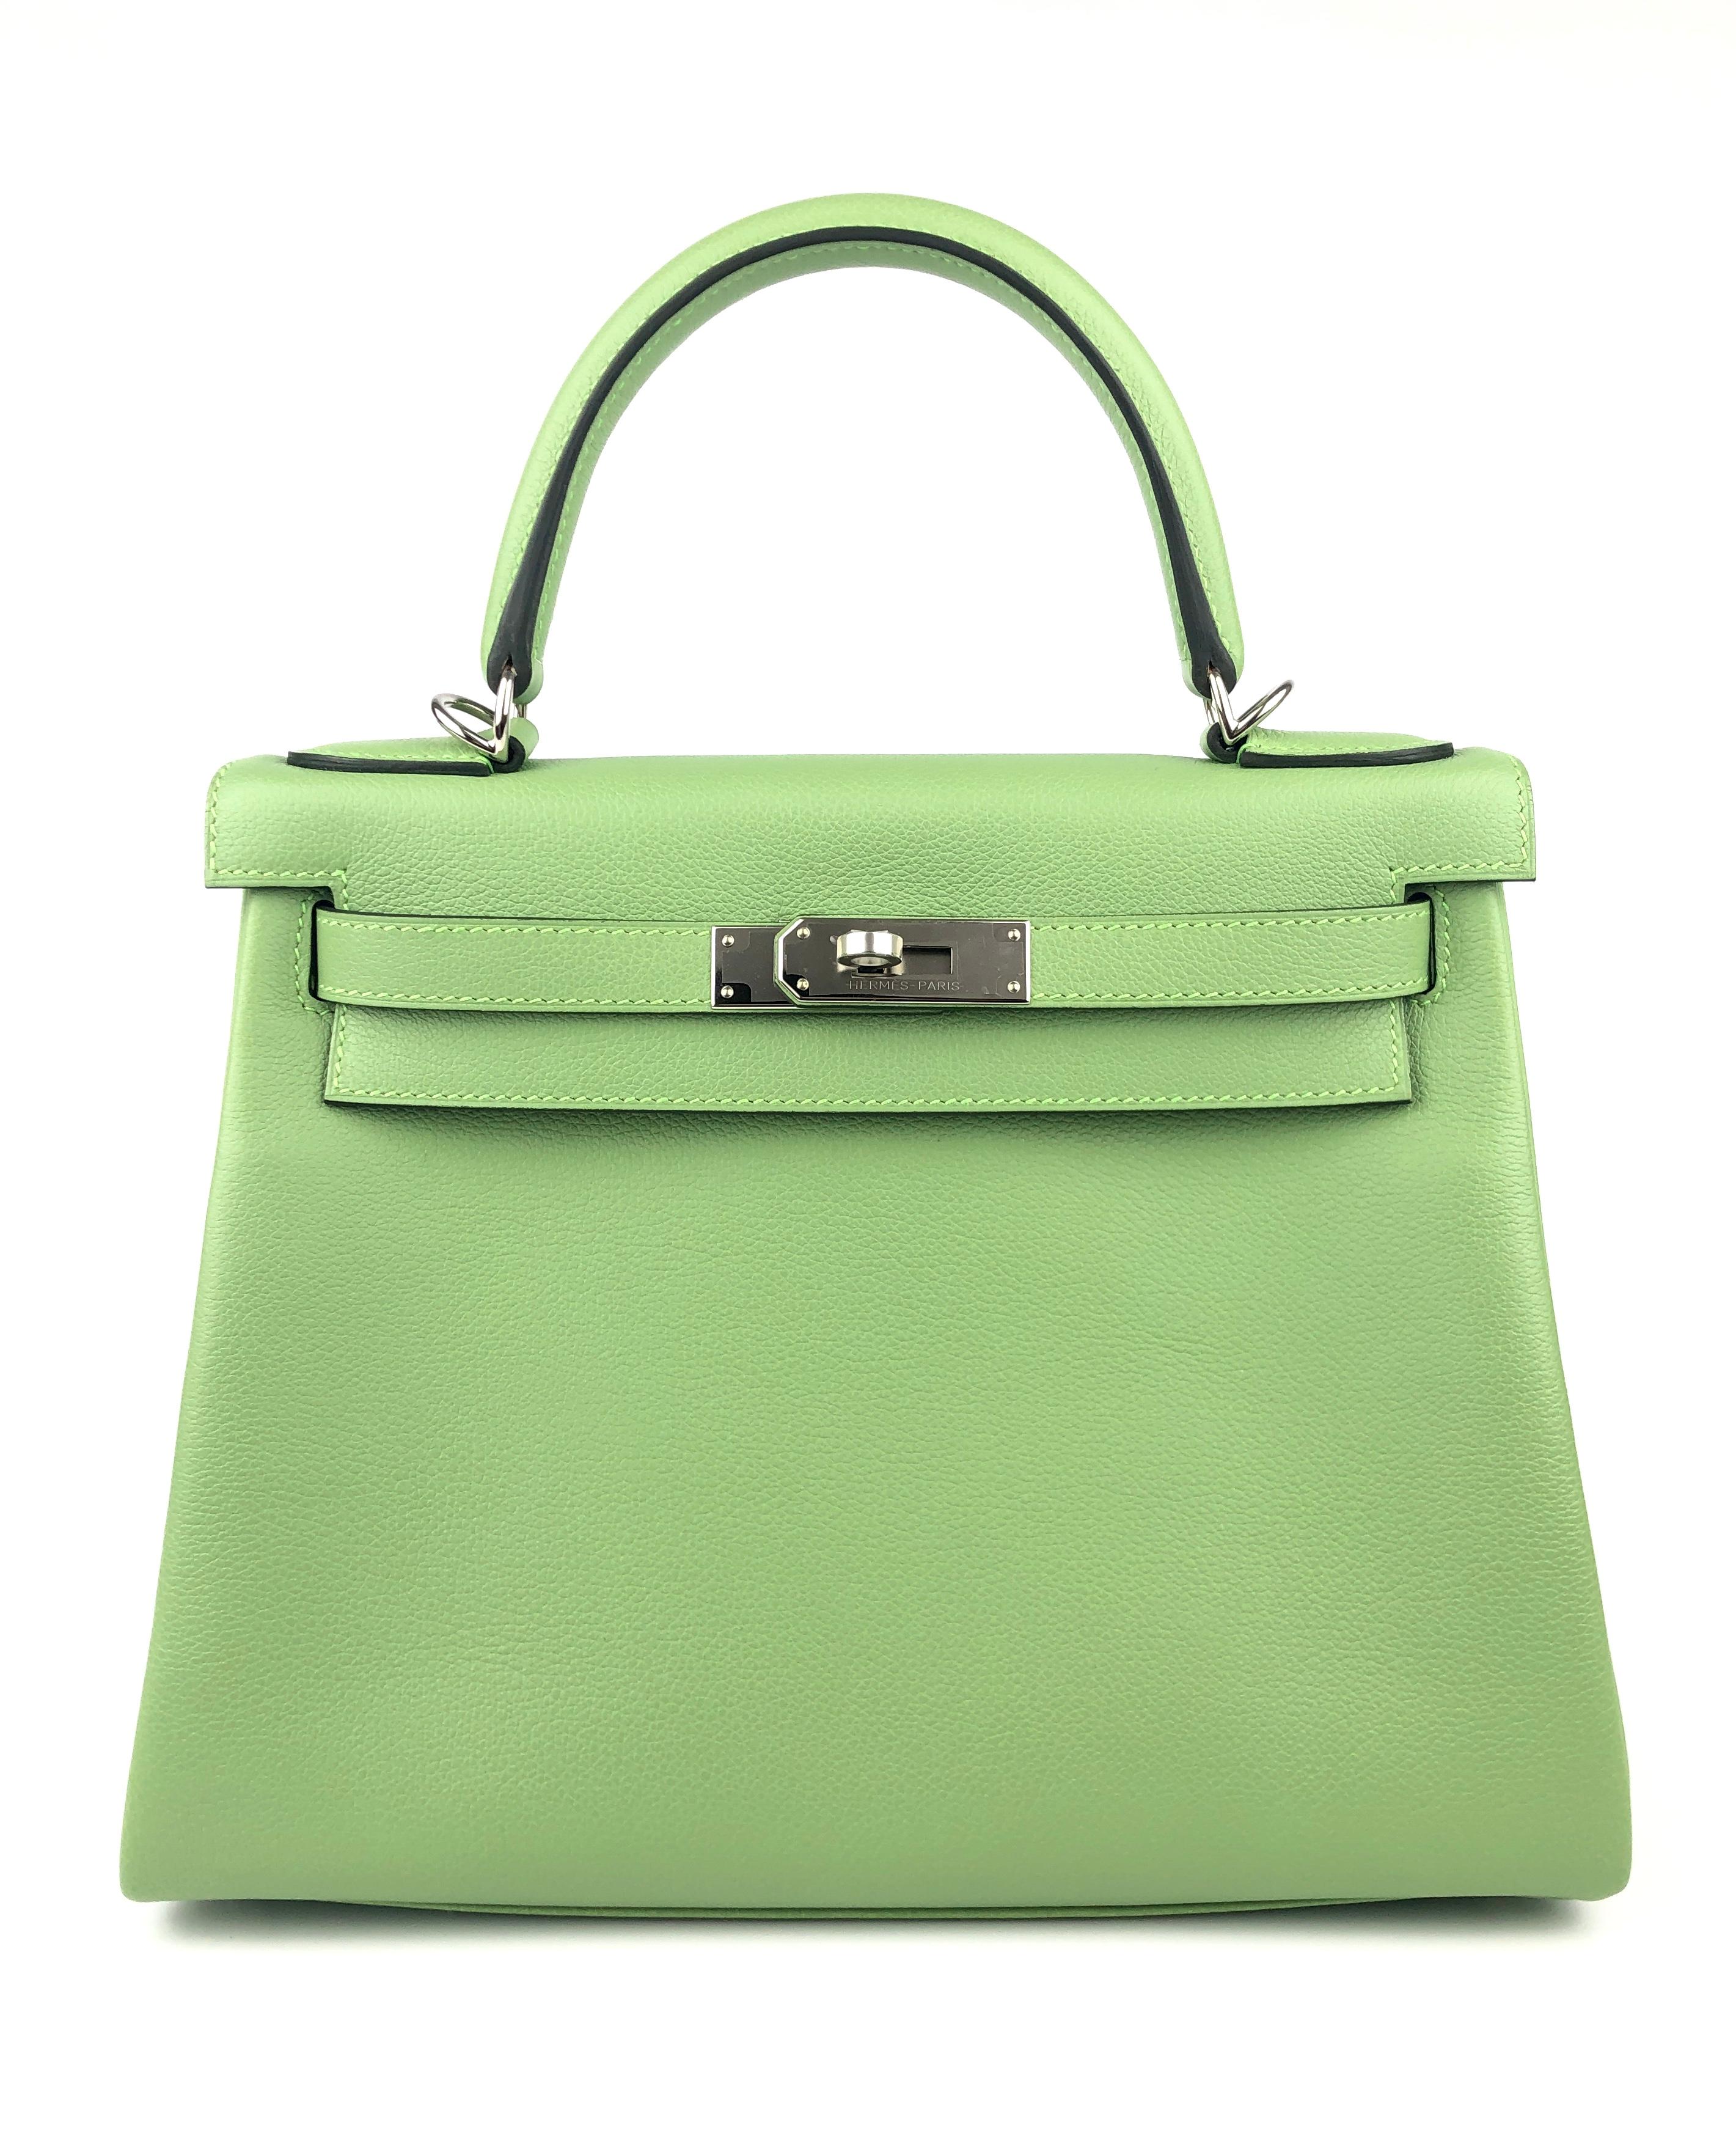 Absolutely Gorgeous As New 2020 Hermes 28 Kelly Vert Criquet Complimented by Palladium Hardware. One of the most coveted hardest to get colors since 2020! Includes all accessories and Box. 

Shop with Confidence from Lux Addicts. Authenticity